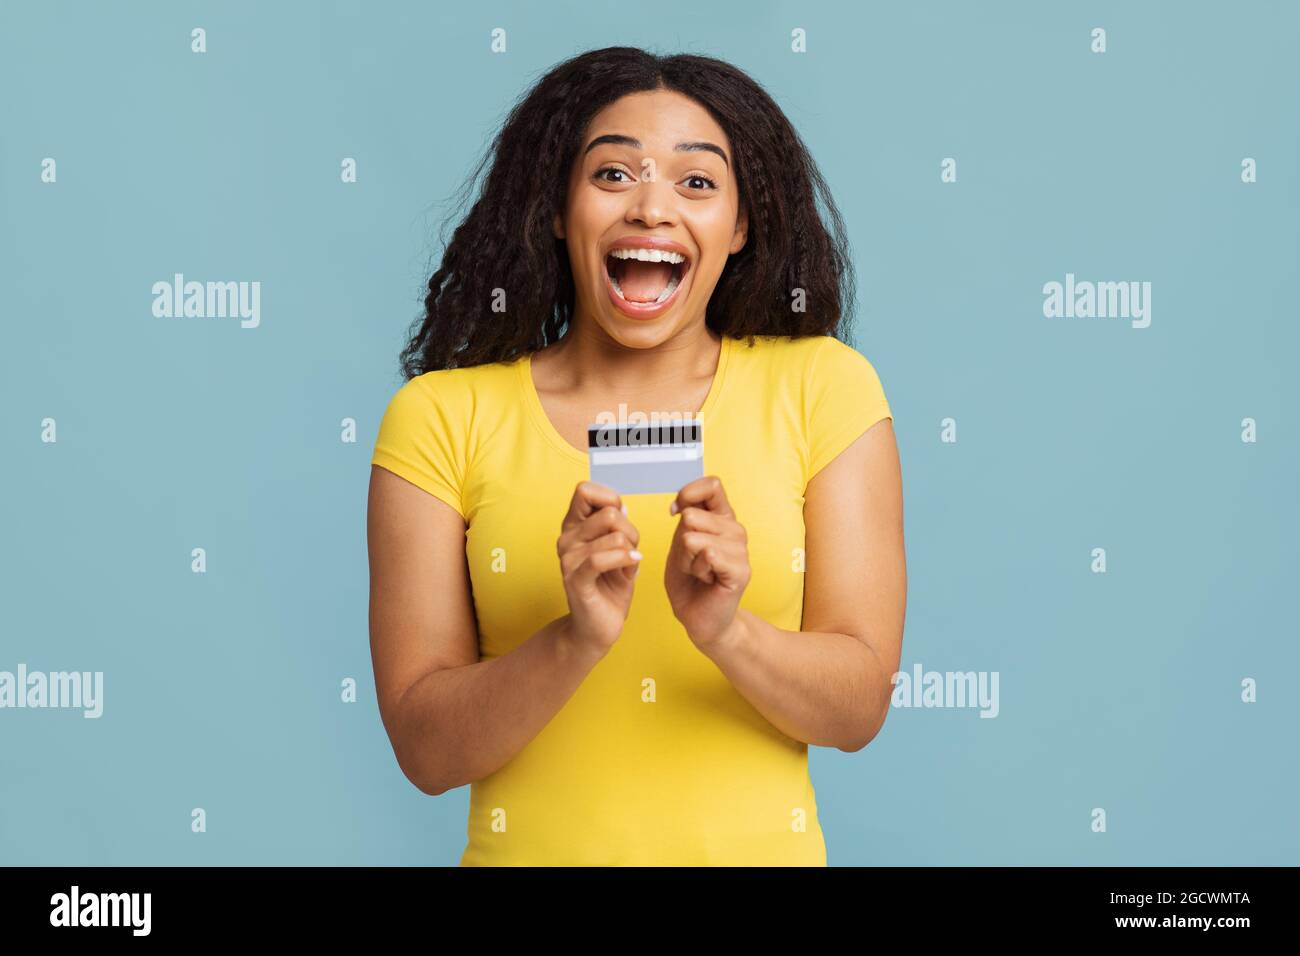 Trustful bank. Overjoyed african american woman demonstrating credit card and opening mouth in excitement Stock Photo